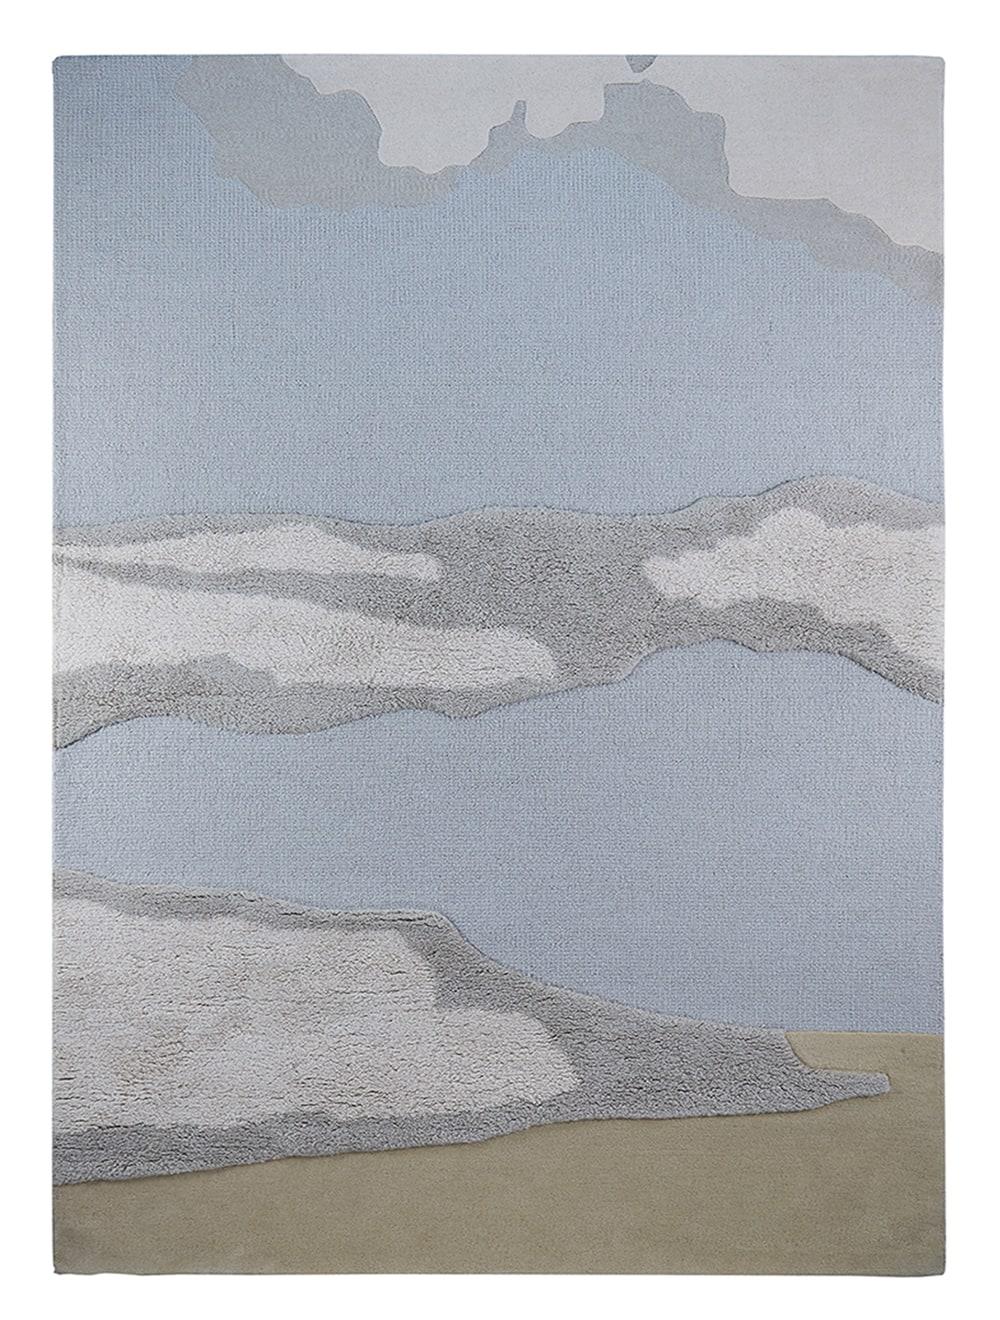 Morning Cloud 9 Carpet by Massimo Copenhagen.
By Facne Design Studio.
Handwoven & Handtufted.
Materials: 100% New Zealand Wool.
Dimensions: W 300 x H 400 cm.
Available colors: Morning, Day, Afternoon, and Cloudy.
Other dimensions are